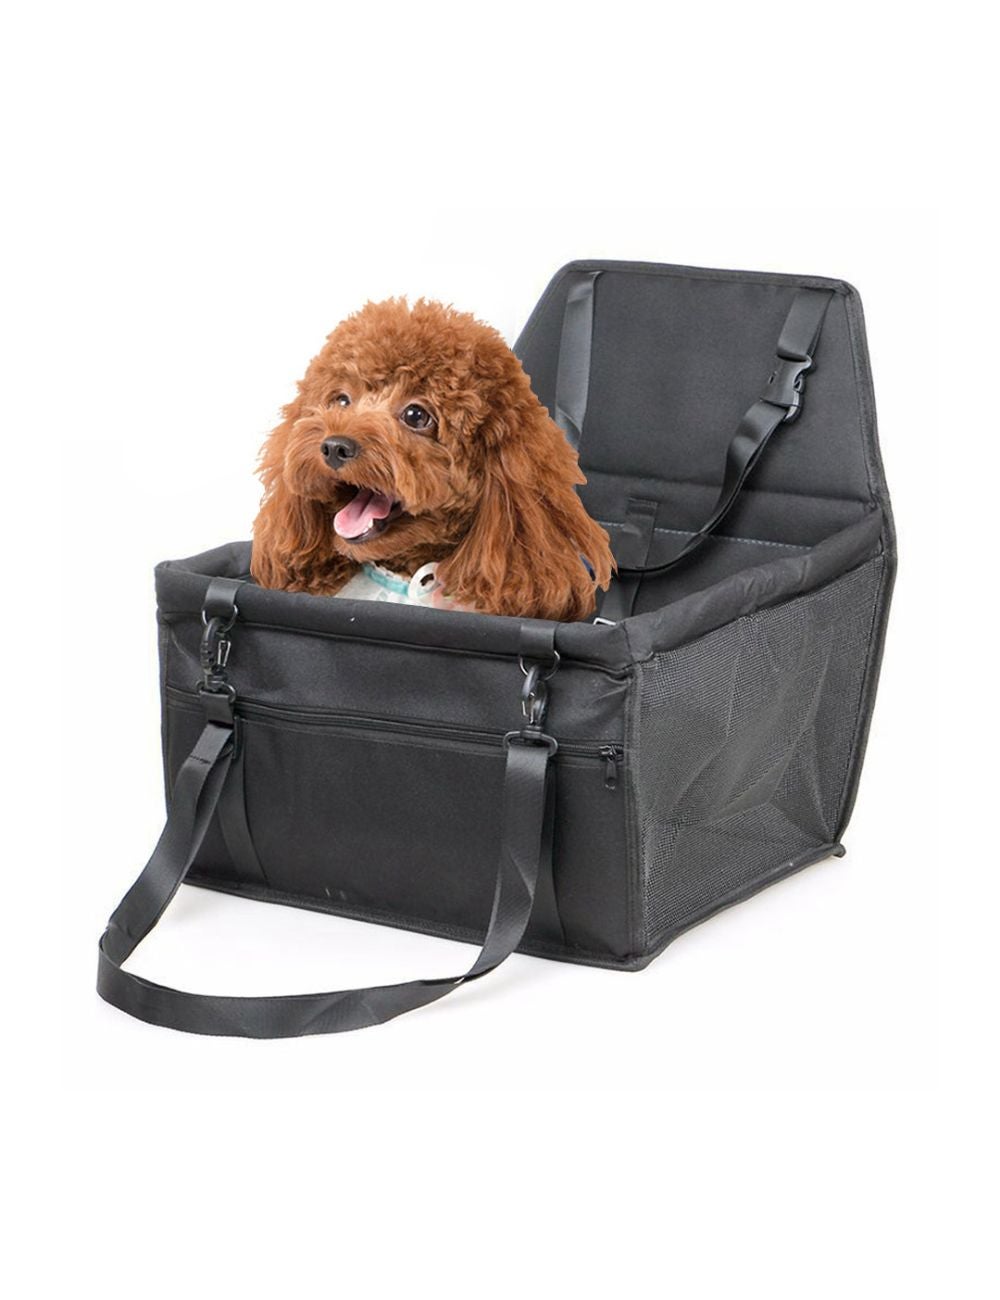 Dog Car Seat - Travel Pet Carrier Bag - Harness, Booster, Cover